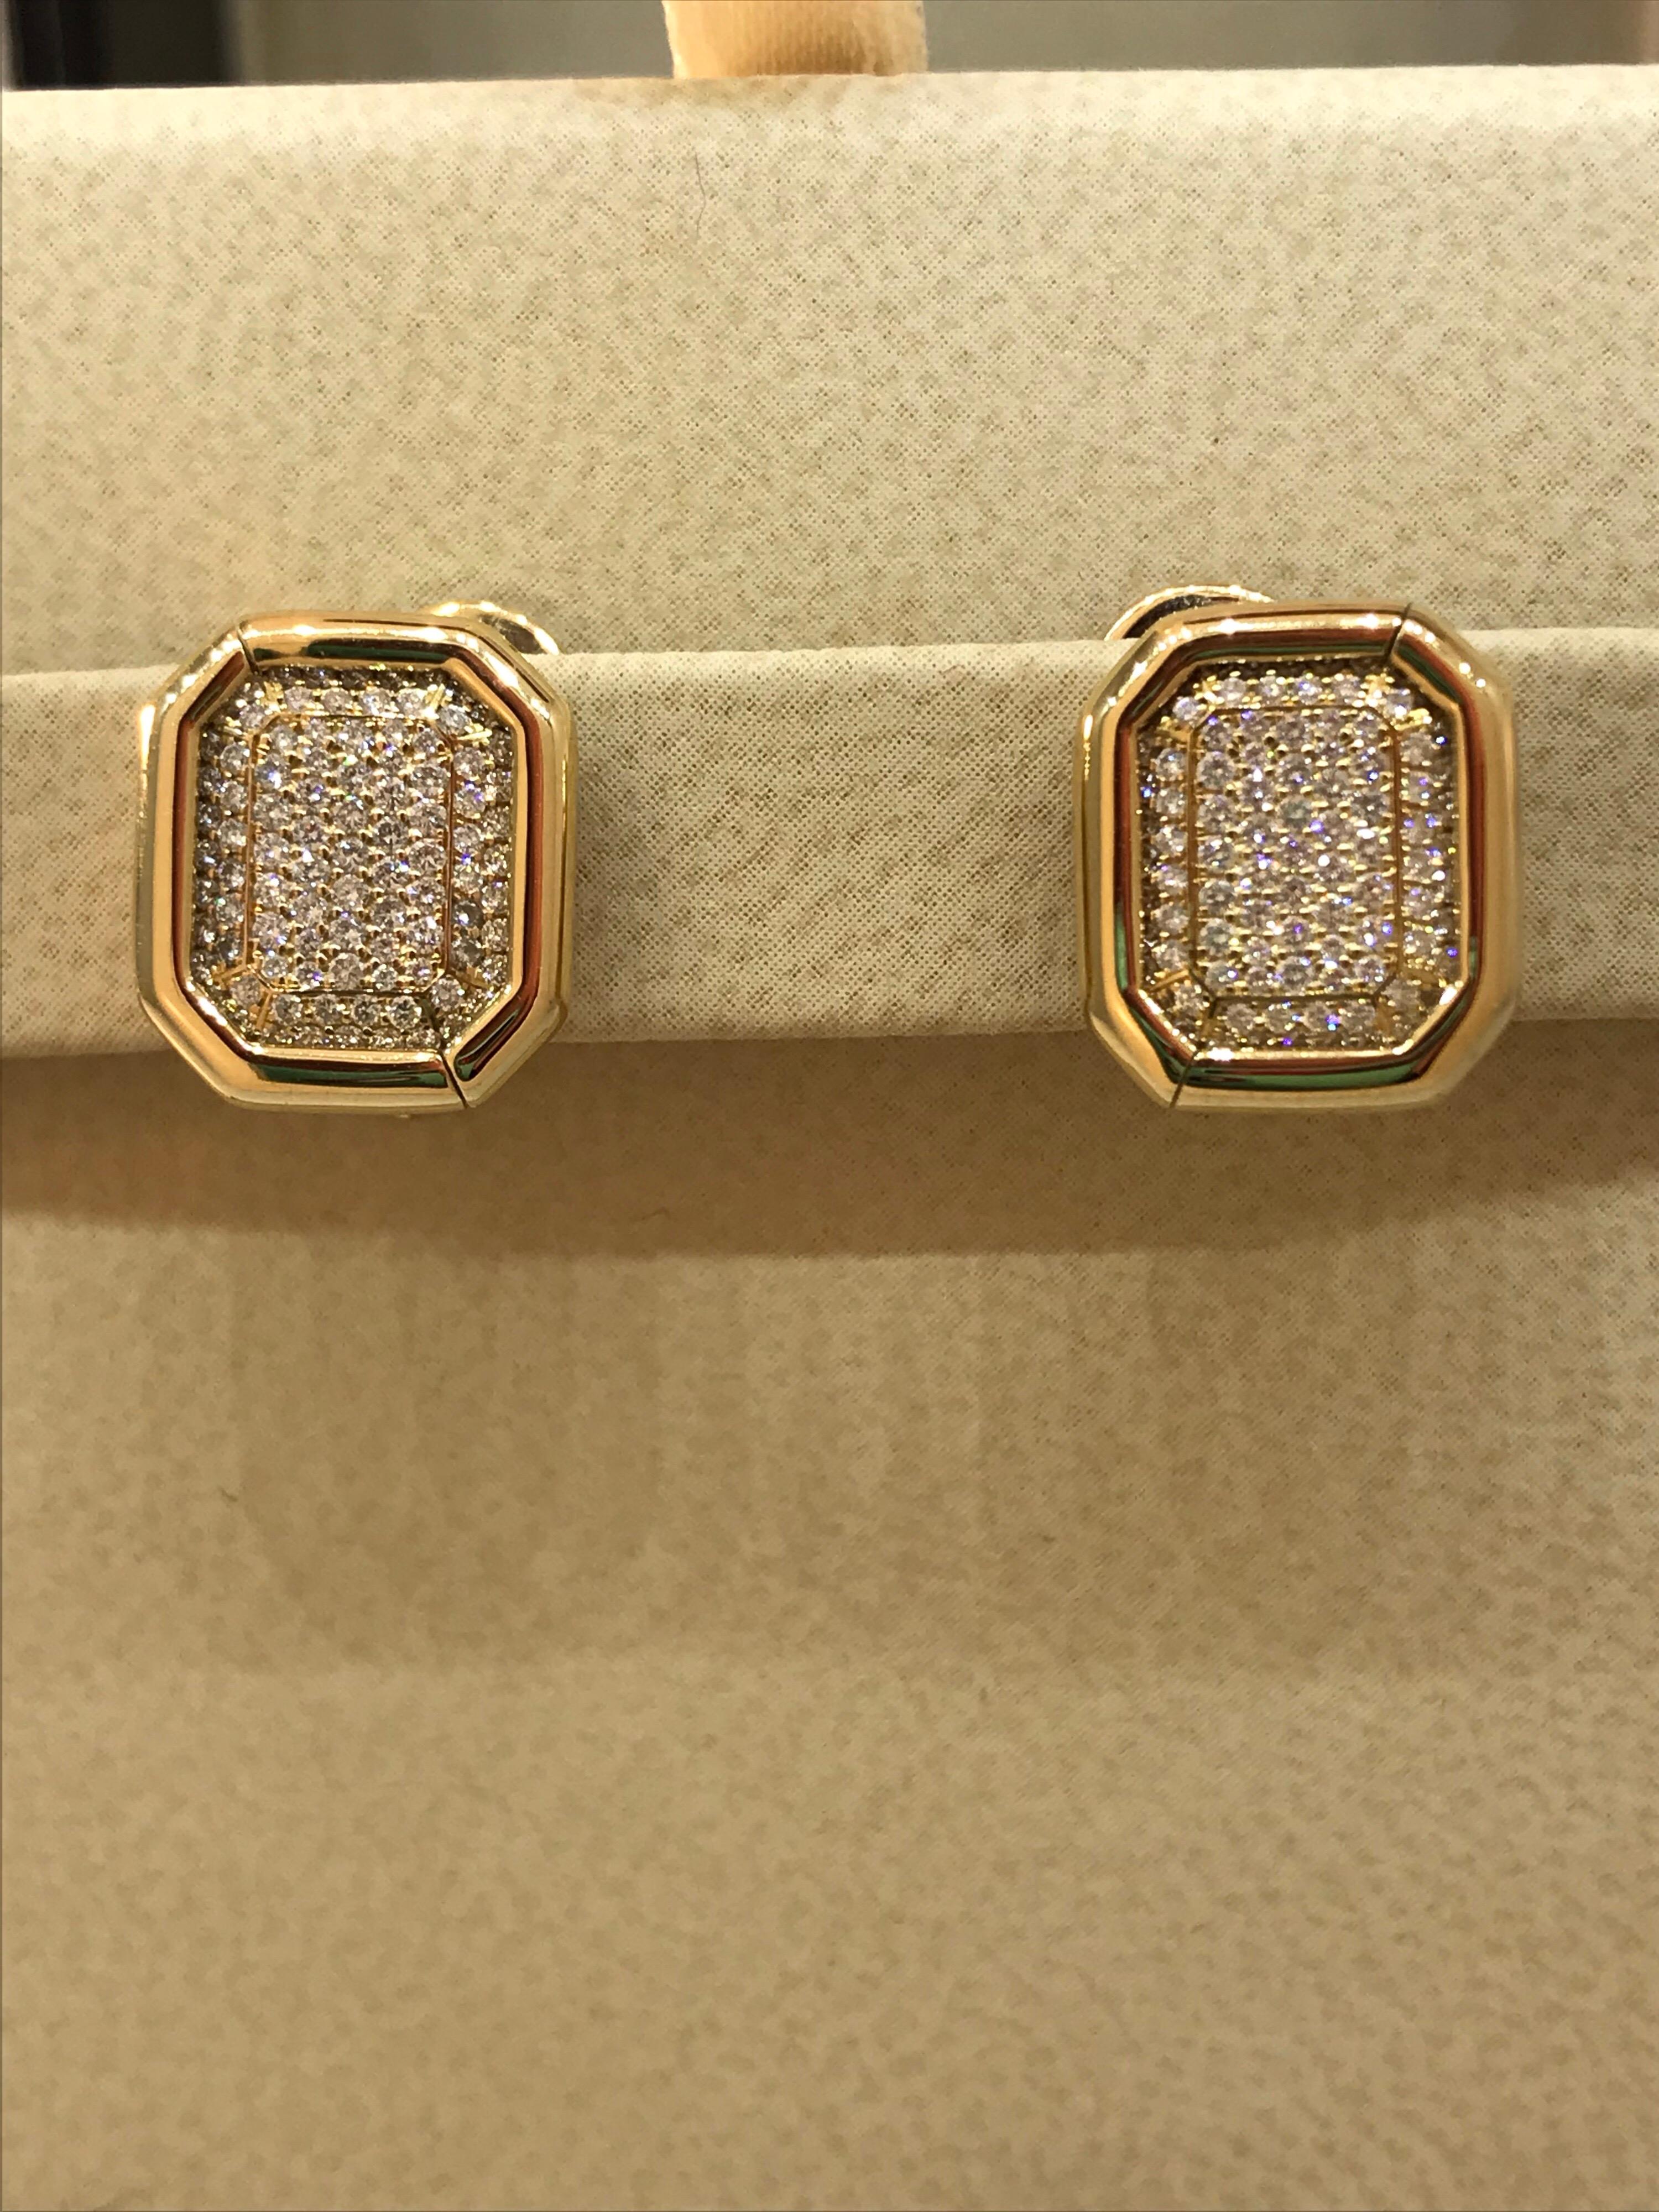 Women's Chopard Yellow Gold Pave Diamond Earrings 84/6014 For Sale